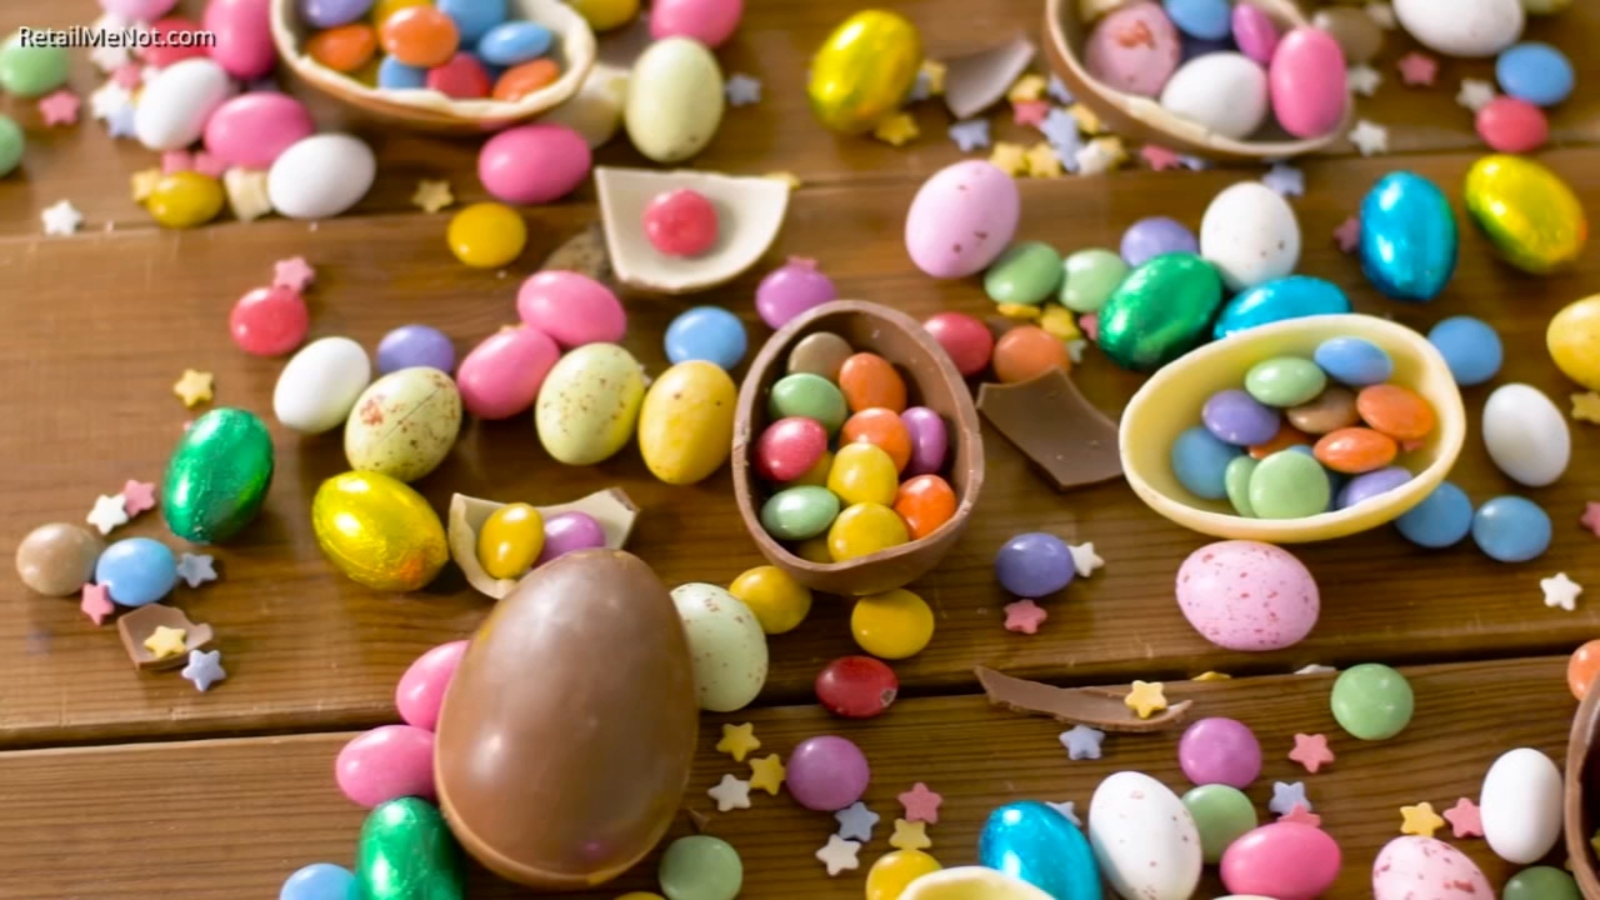 Illinois' favorite Easter candy is Reese's Peanut Butter Chocolate Eggs